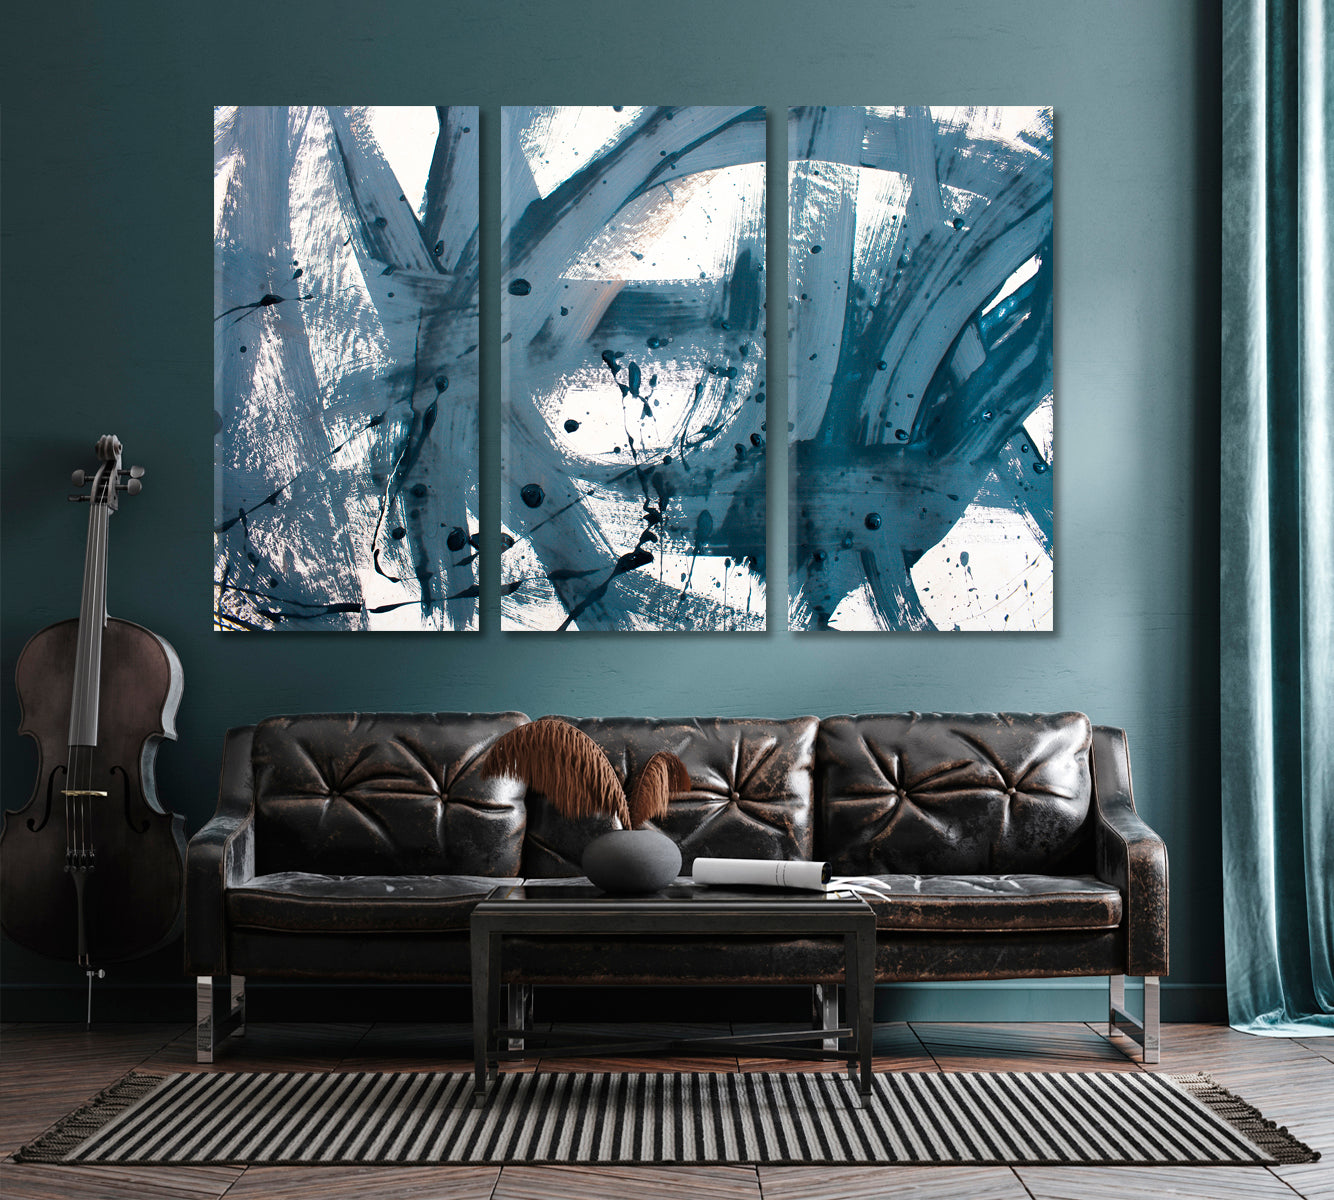 Gray On White Contemporary Abstract Artistic Brush Stroke Painting Contemporary Art Artesty 3 panels 36" x 24" 